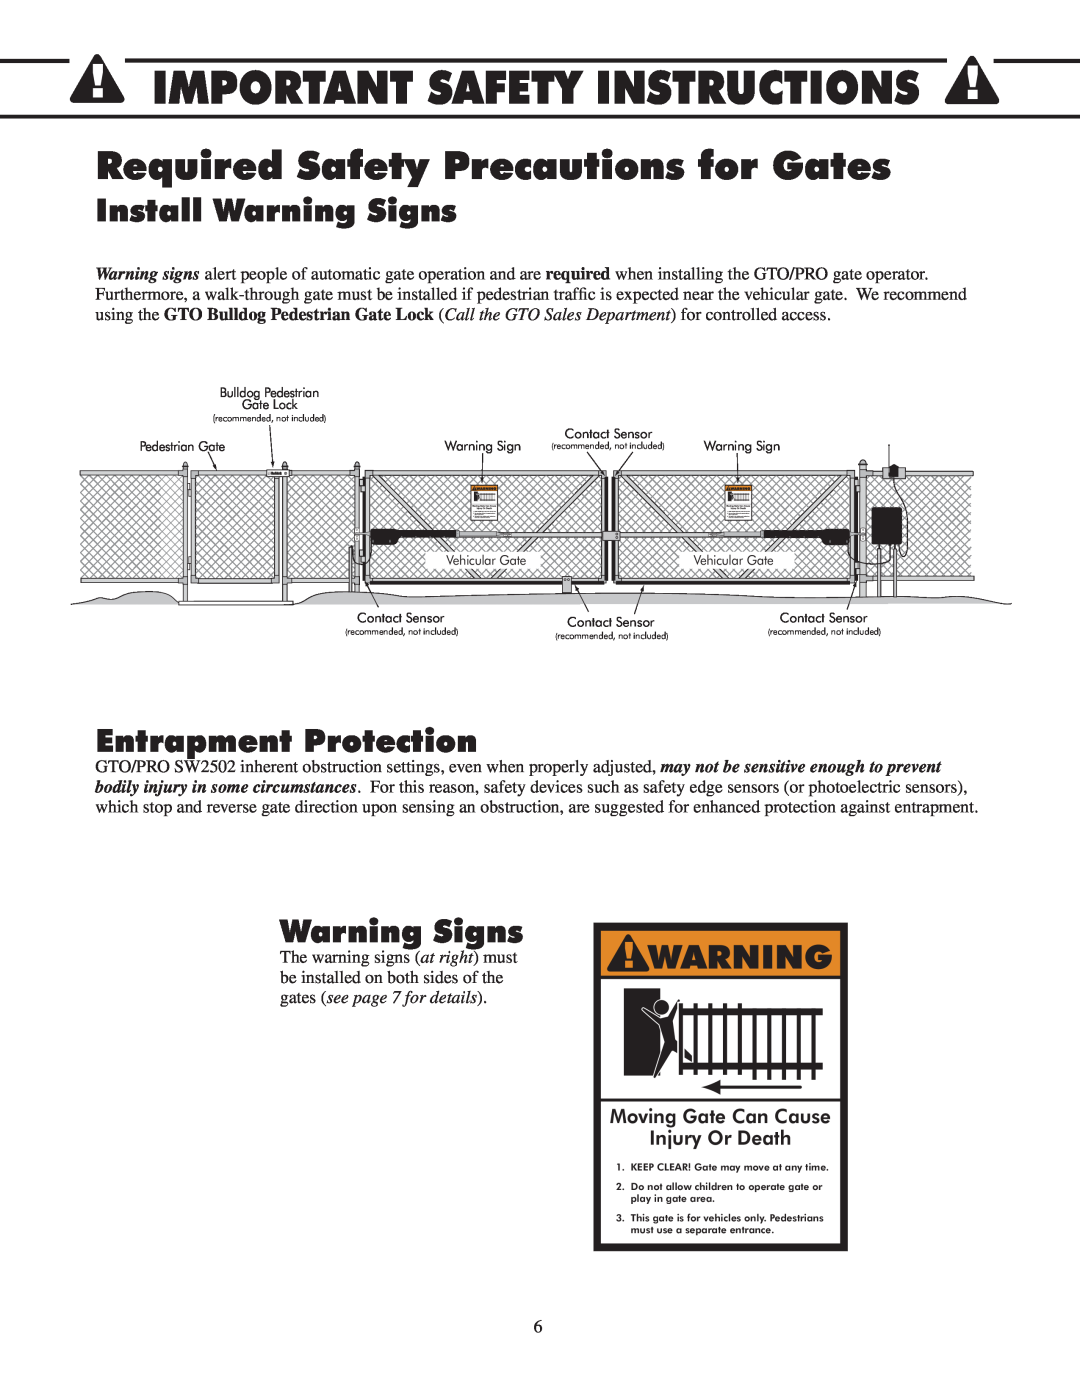 GTO 2550, 2502 installation manual Required Safety Precautions for Gates, Install Warning Signs, Entrapment Protection 